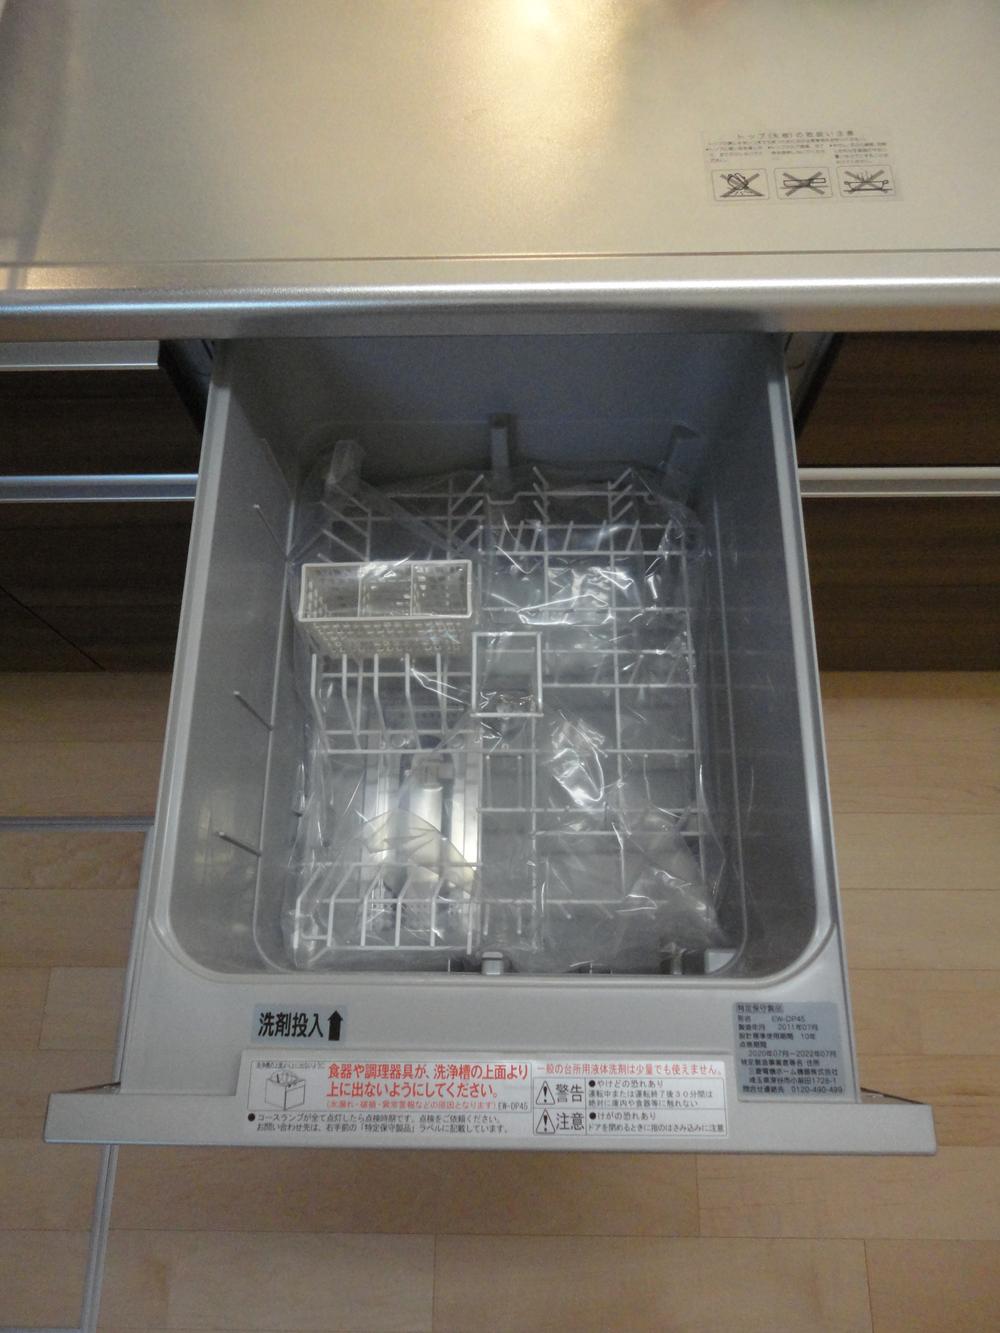 Other Equipment. Dishwasher of Easy housework item (same specifications)